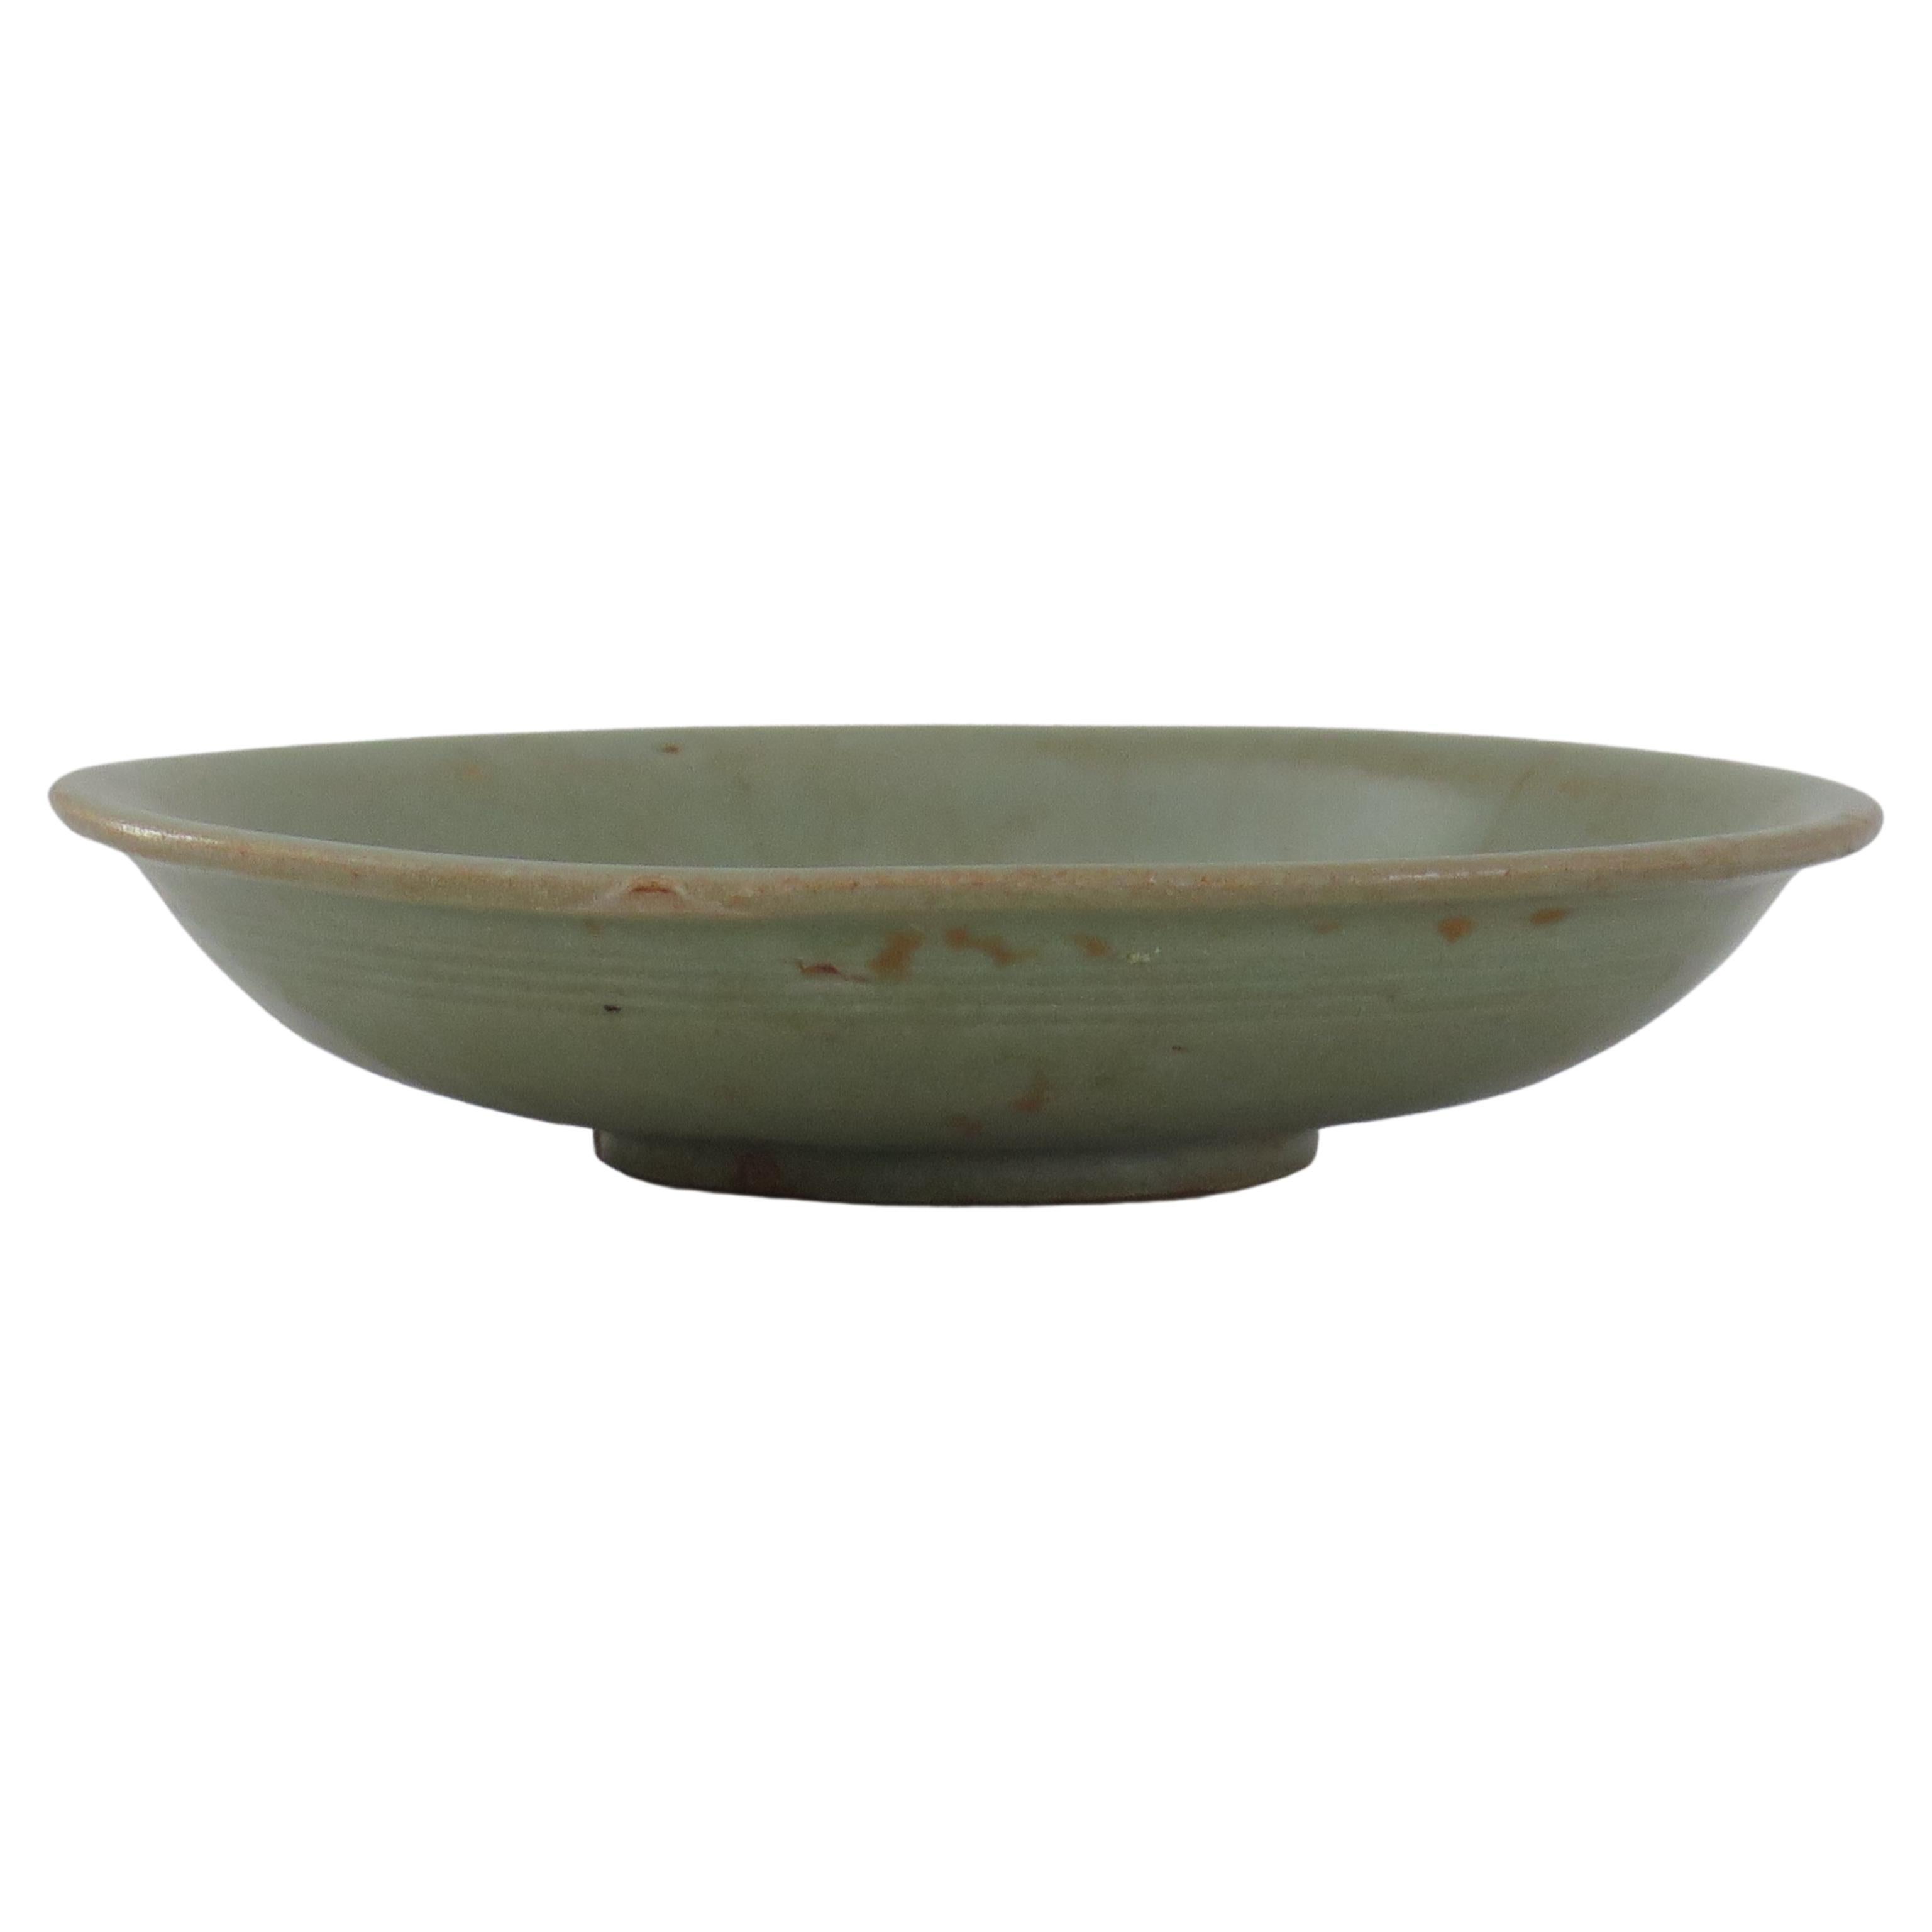 Chinese Stoneware Bowl or Dish Longquan Celadon Incised, Yuan Dynasty 1271-1368